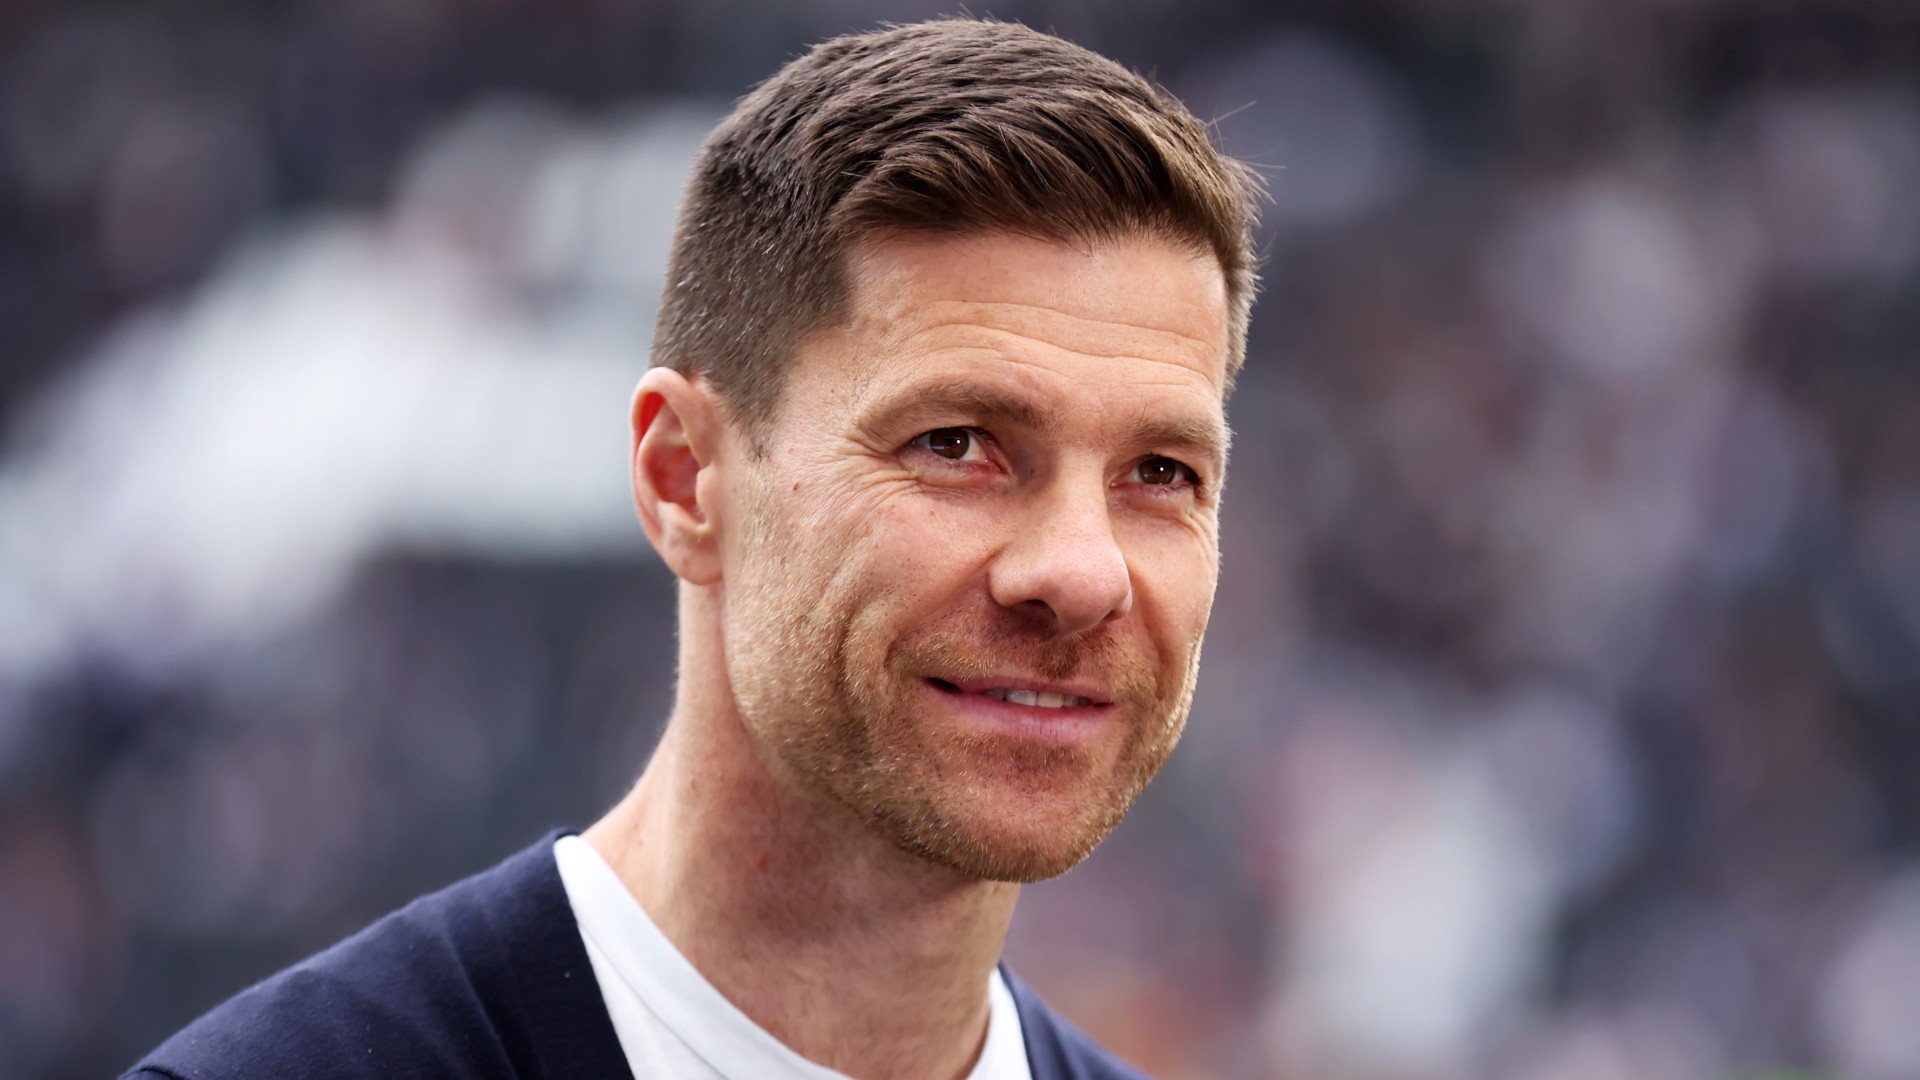 Xabi Alonso (Getty Images)